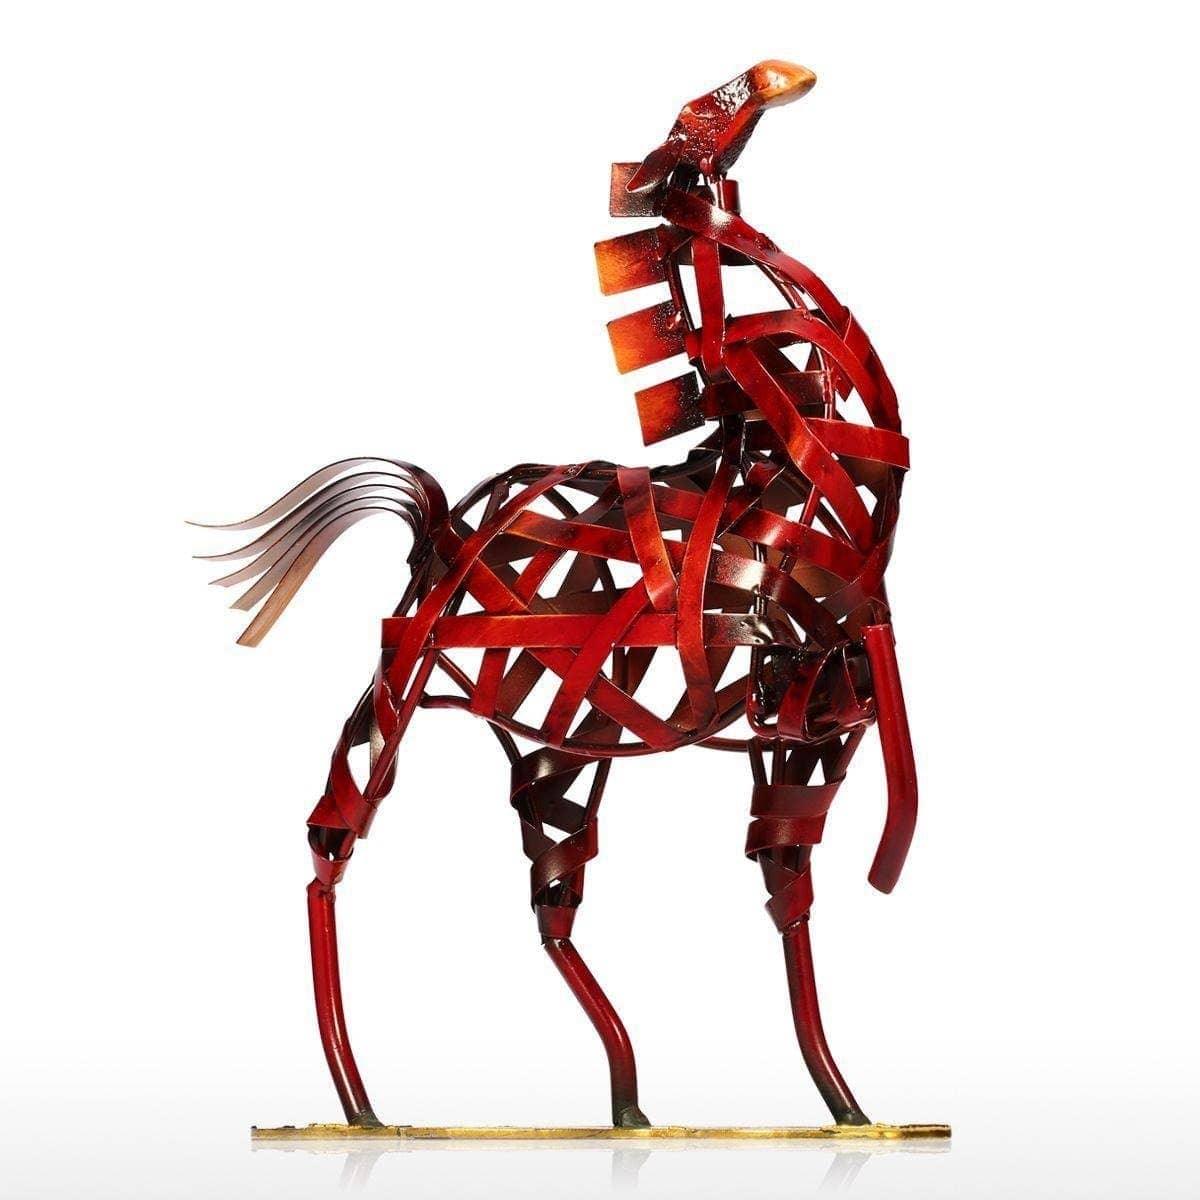 Intricate Weaving Horse Home Decor: A Unique, Artistic Touch